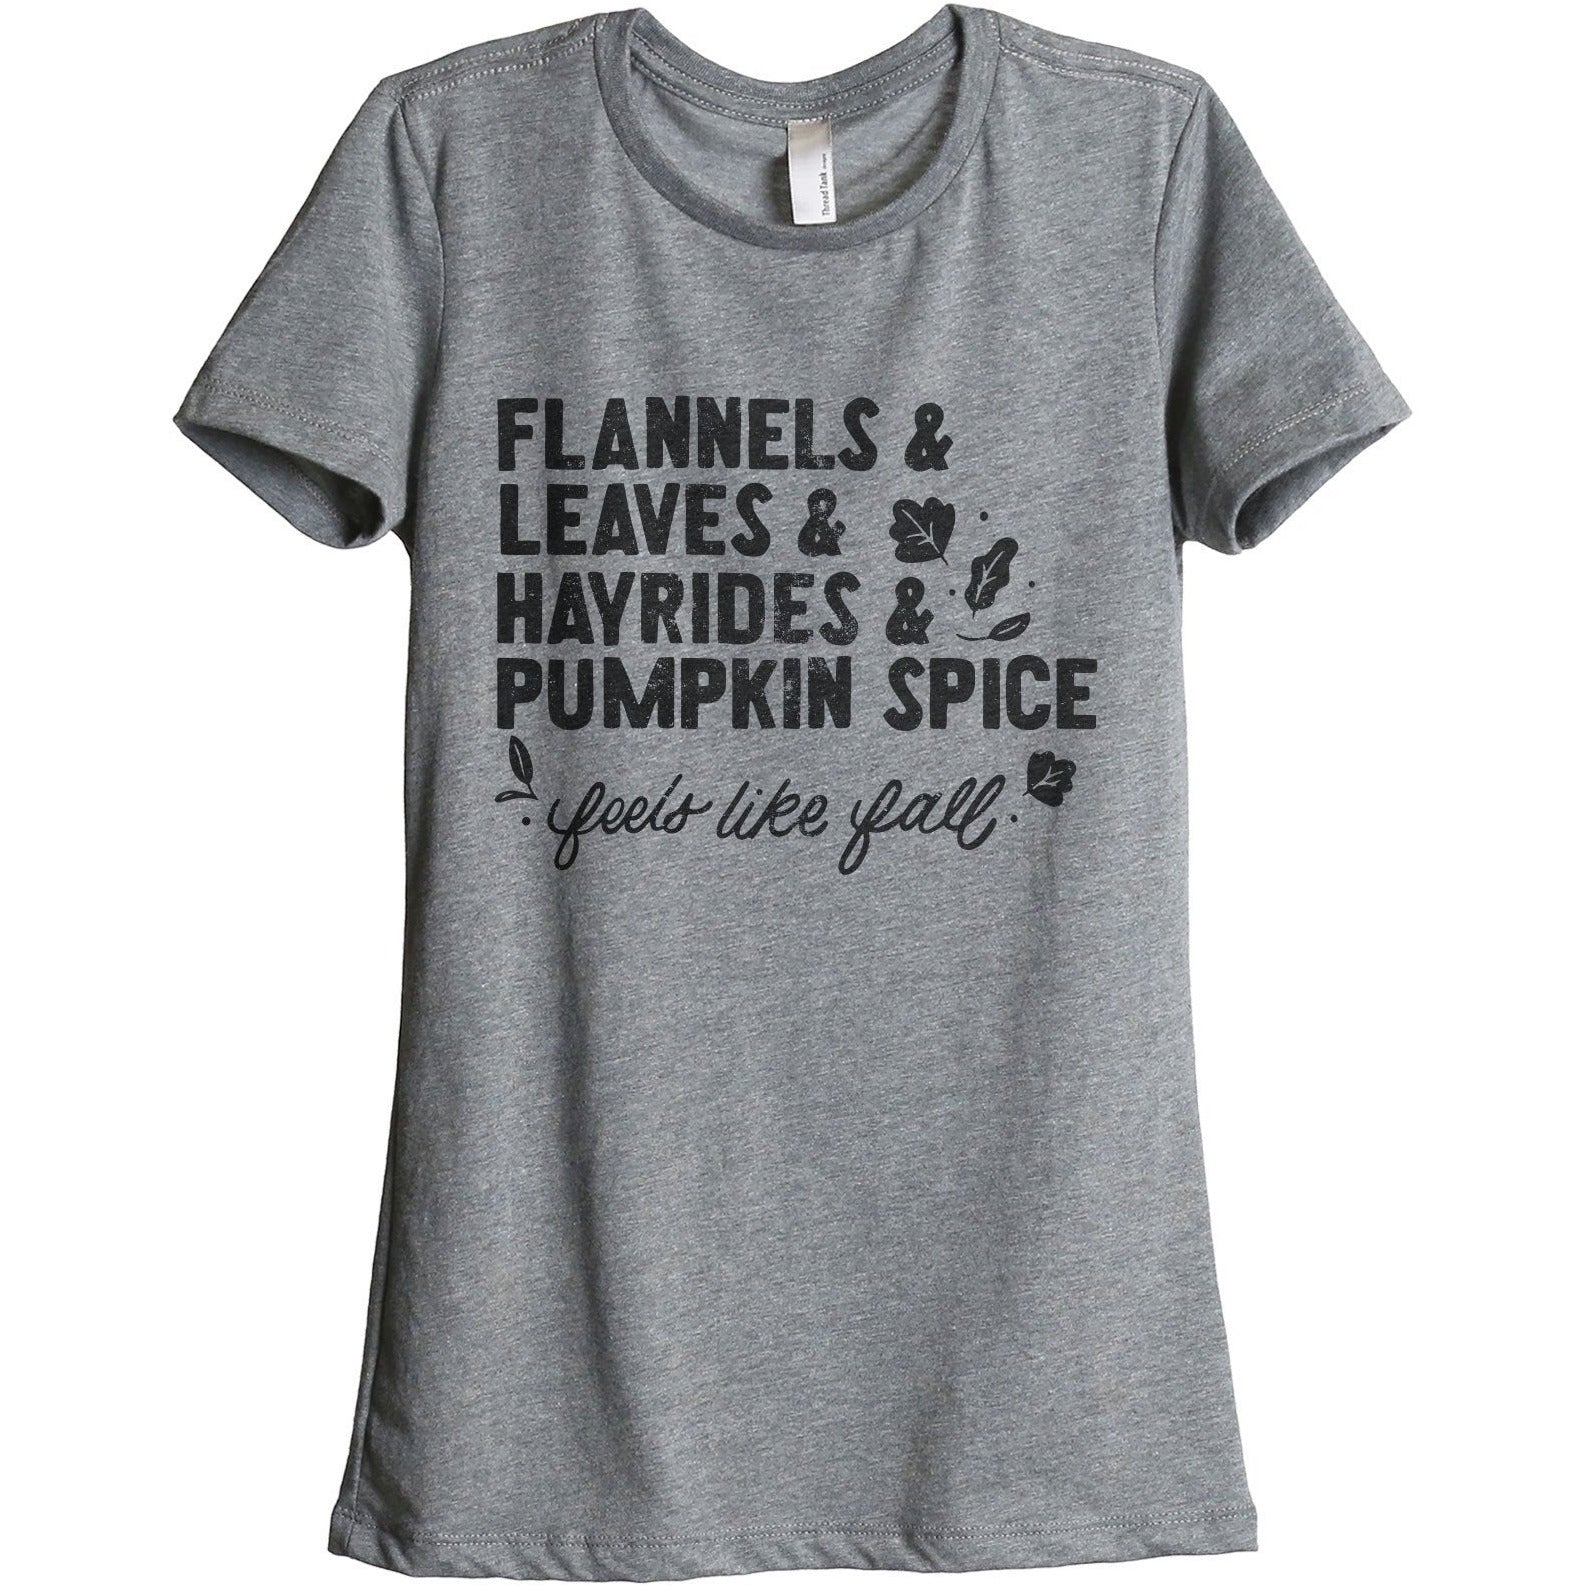 Flannels & Leaves & Hayrides & Pumpkin Spice...Feels like Fall Women's Relaxed Crewneck T-Shirt Top Tee Heather Grey